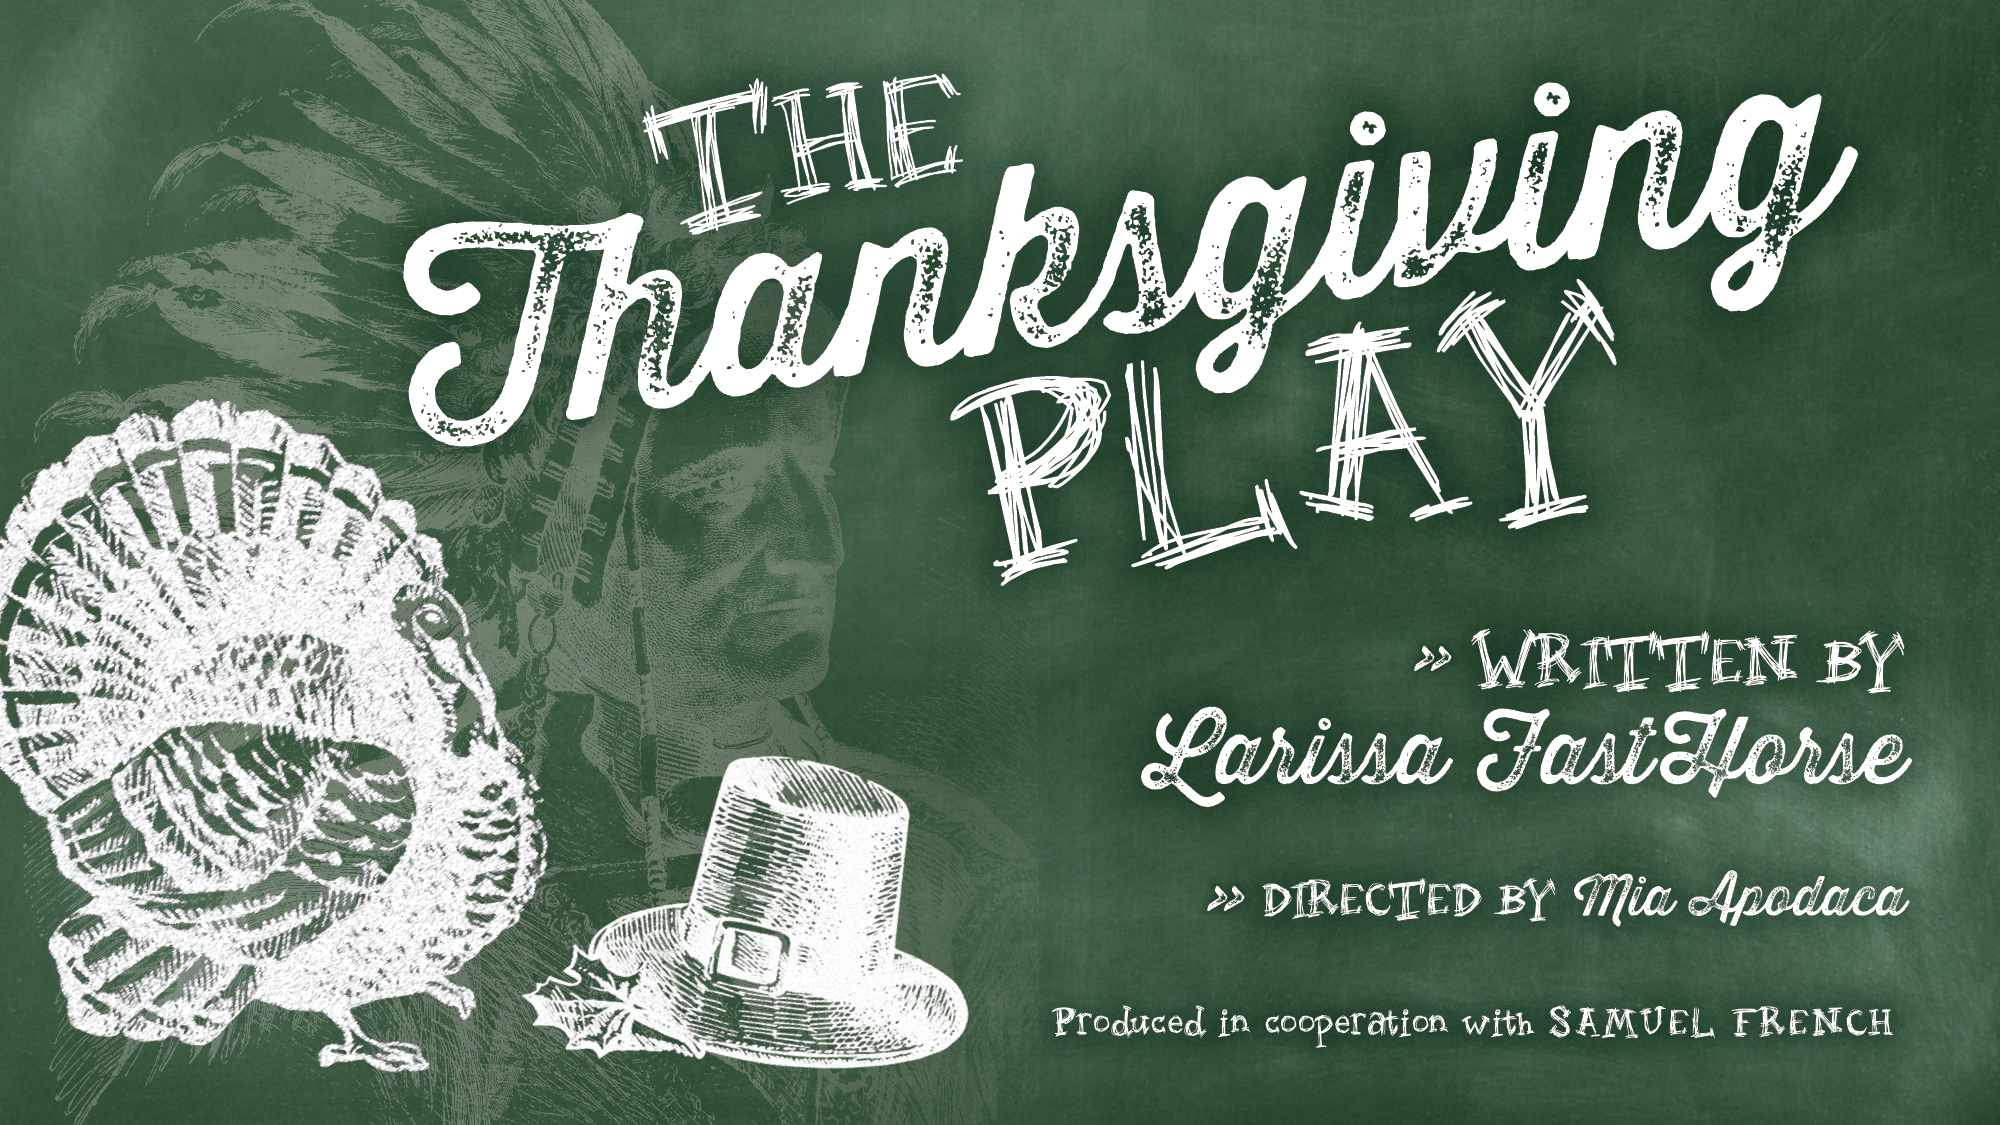 The Thanksgiving Play, written by larissa fasthorse, directed by nyla mccarthy, produced in cooperation with samuel french